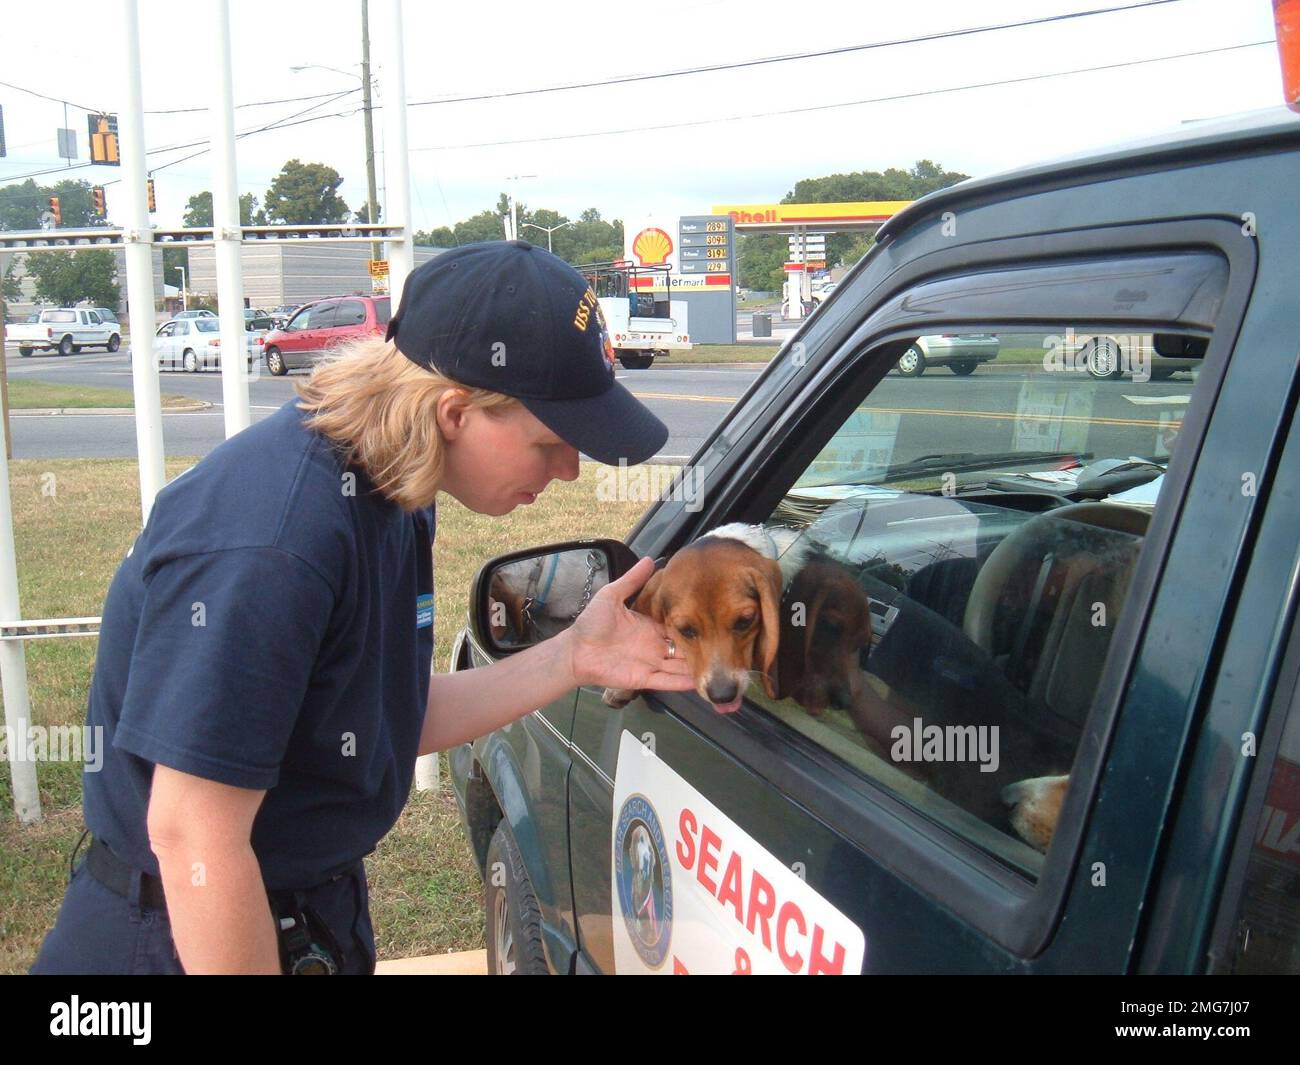 Animals - 26-HK-59-5. dog leaning out window of search-and-rescue vehicle, being petted by personnel near commercial street -- 050916. Hurricane Katrina Stock Photo